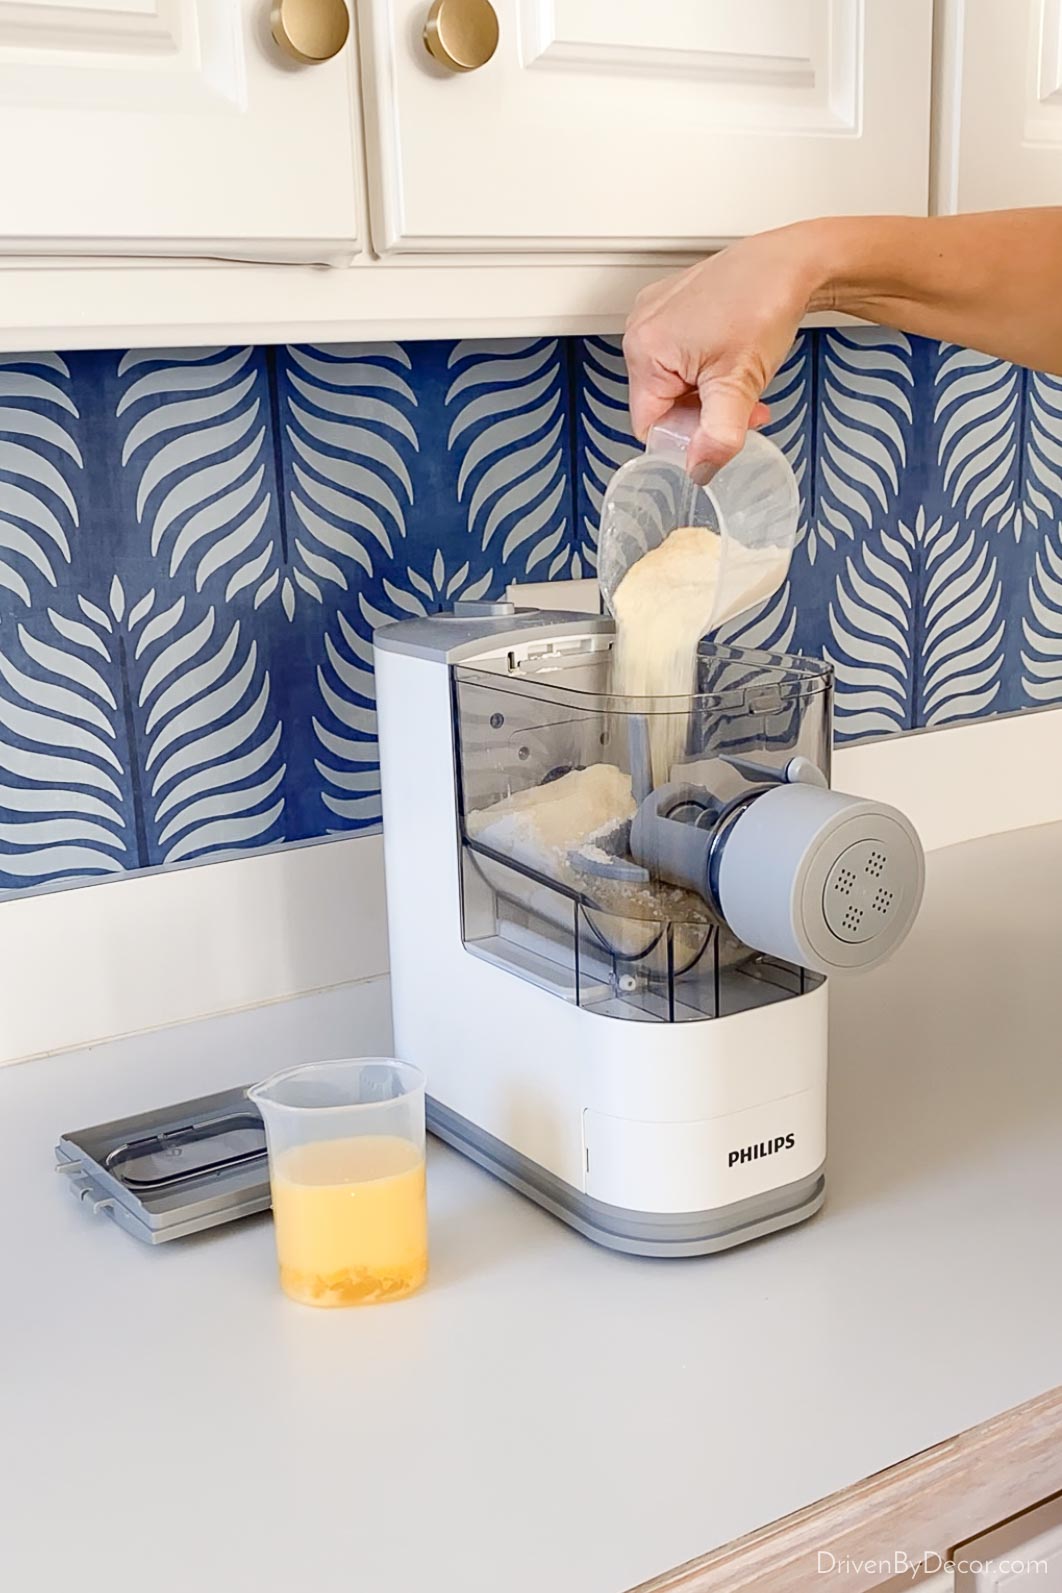 This pasta making machine makes pasta with just flour, egg, and water